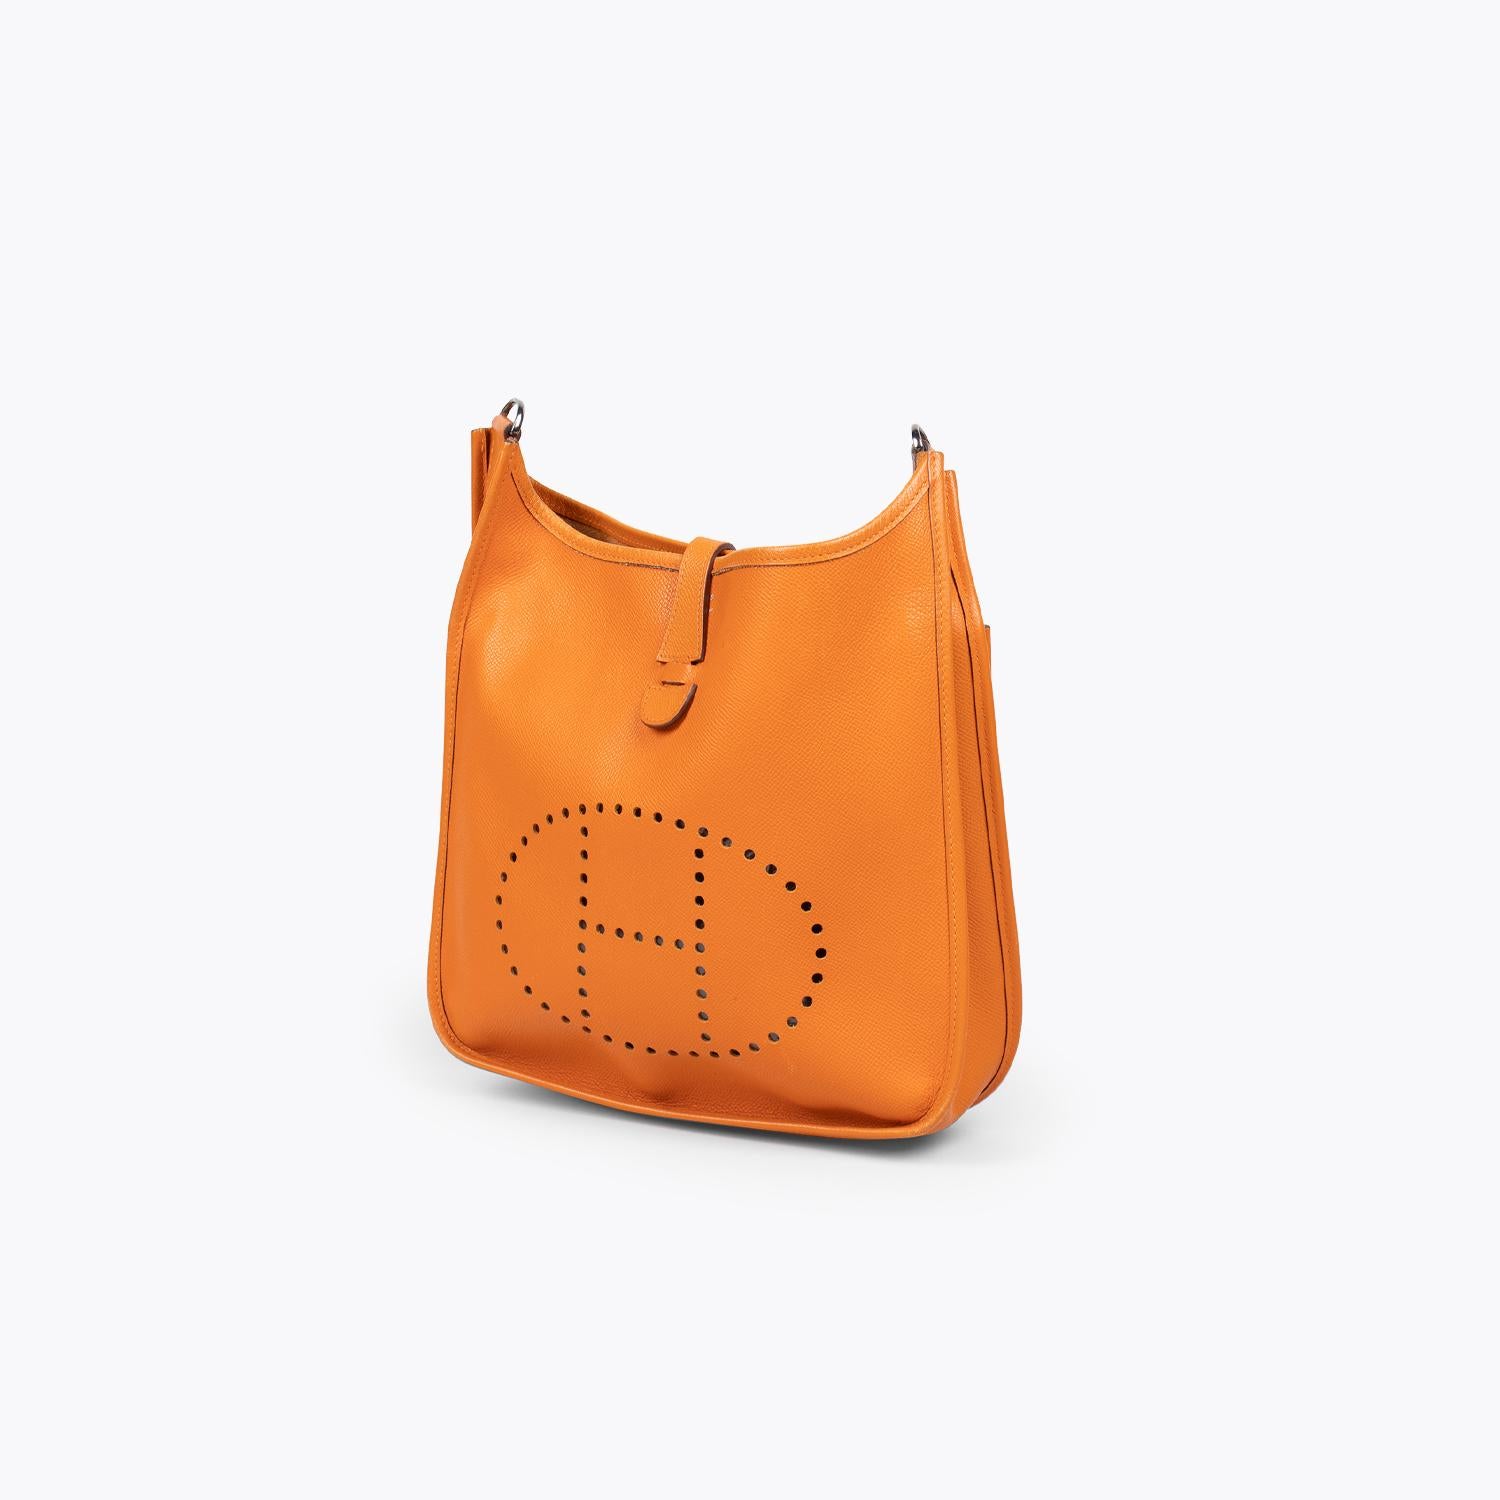 Terre Battue Clemence Hermès Evelyne II PM with

– Palladium-plated hardware
– Single optional adjustable flat shoulder strap
– Perforated logo detail at front face
– Single slip pocket with snap closure at back, tonal suede lining and snap closure